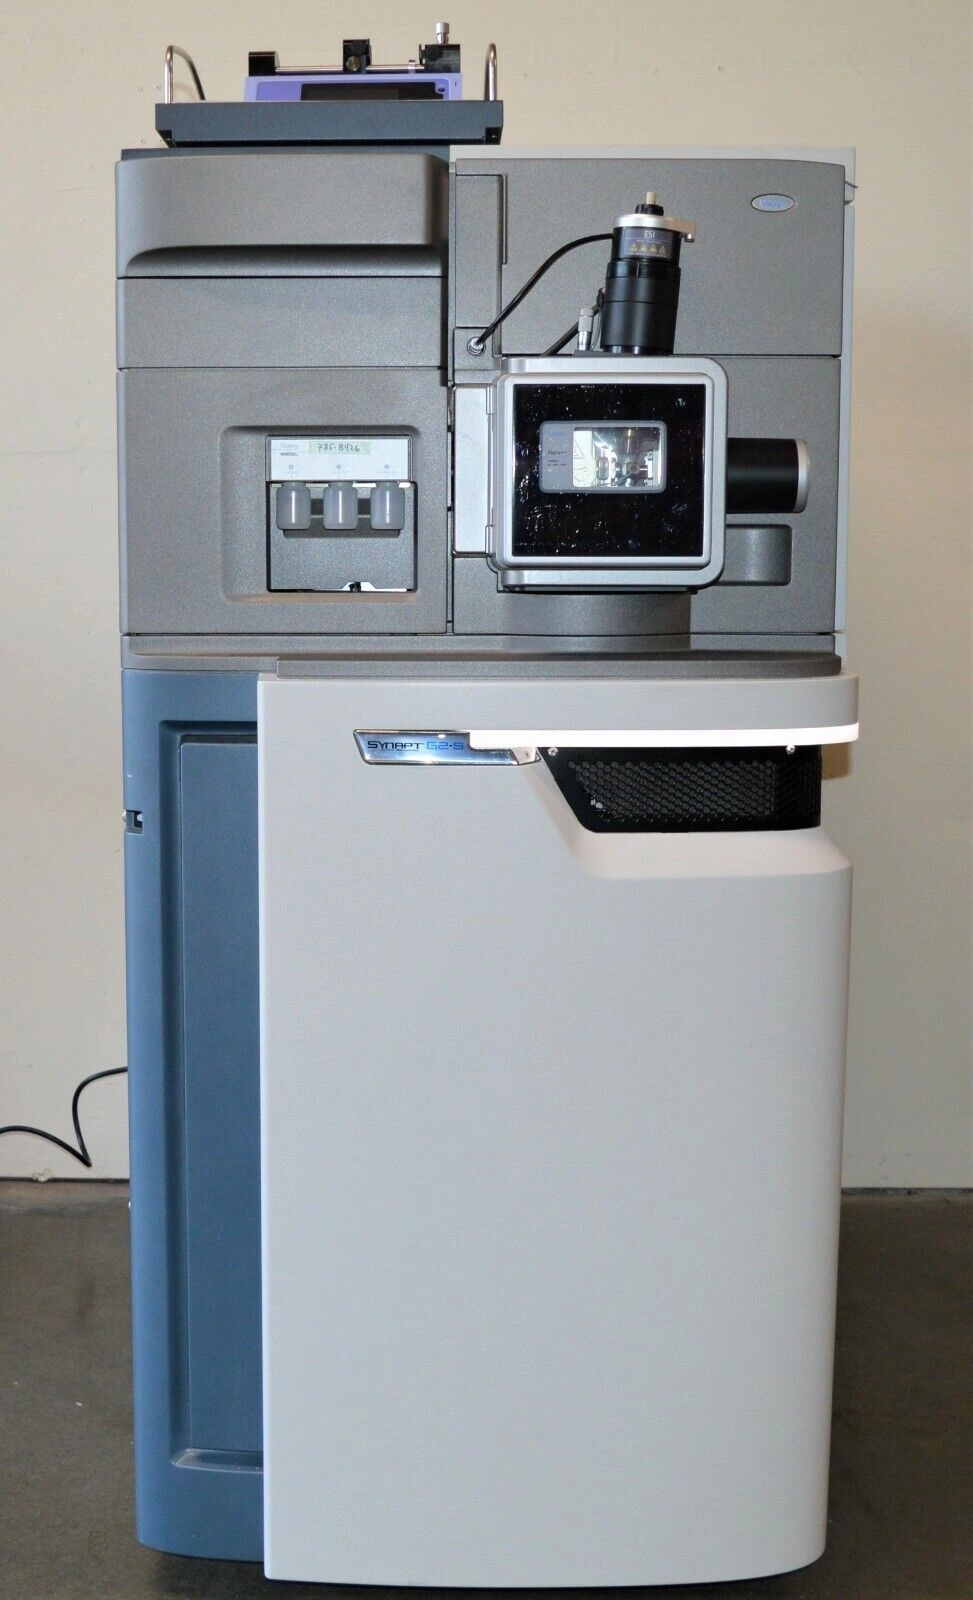 Waters Synapt G2-S Mass Spectrometer